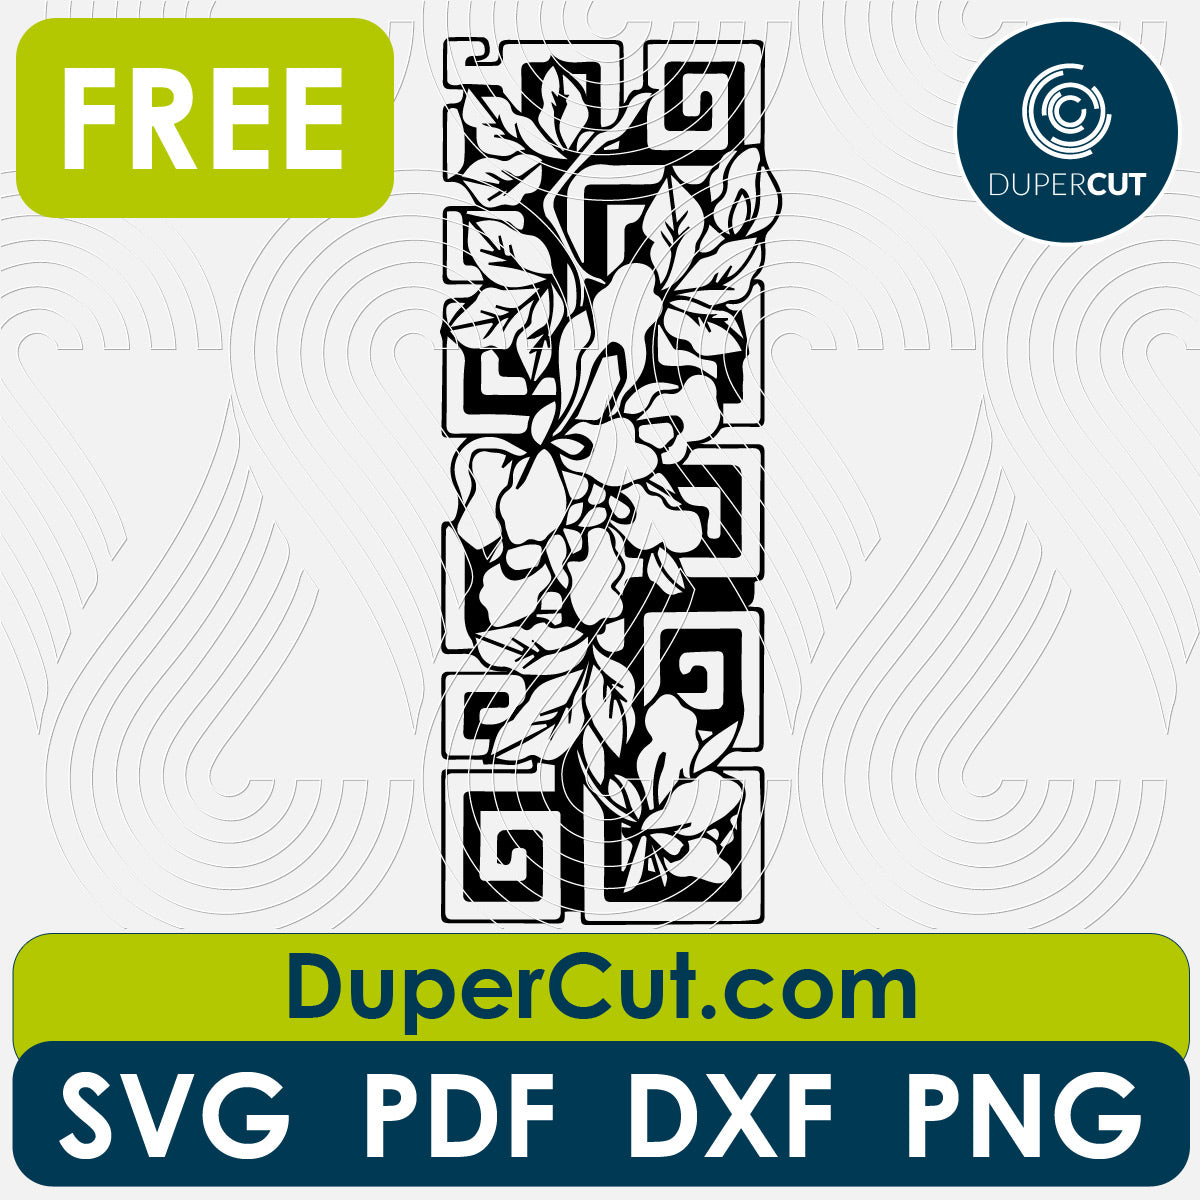 Abstract flower panel free cutting template SVG PNG DXF files for Glowforge, Cricut, Silhouette, CNC laser router by DuperCut.com